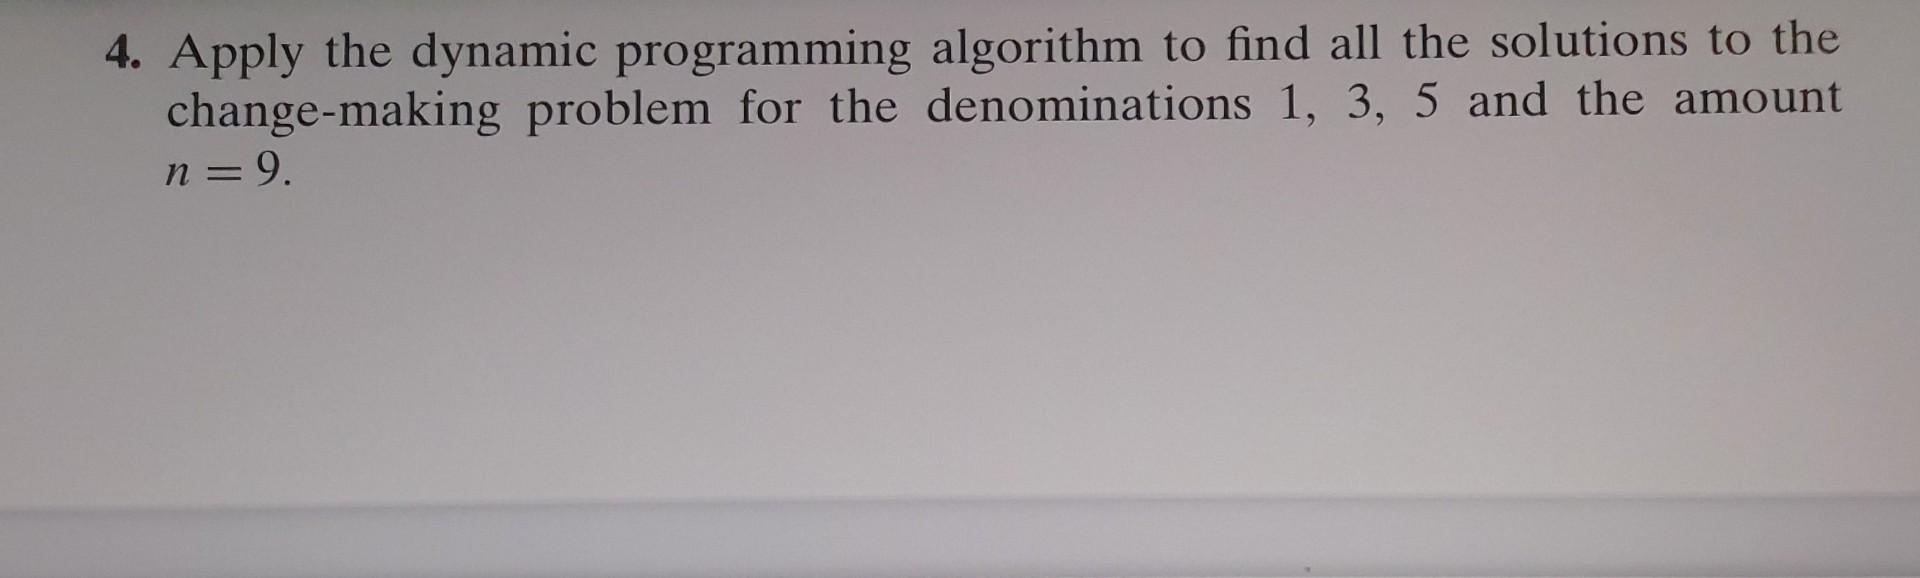 4. Apply the dynamic programming algorithm to find all the solutions to the change-making problem for the